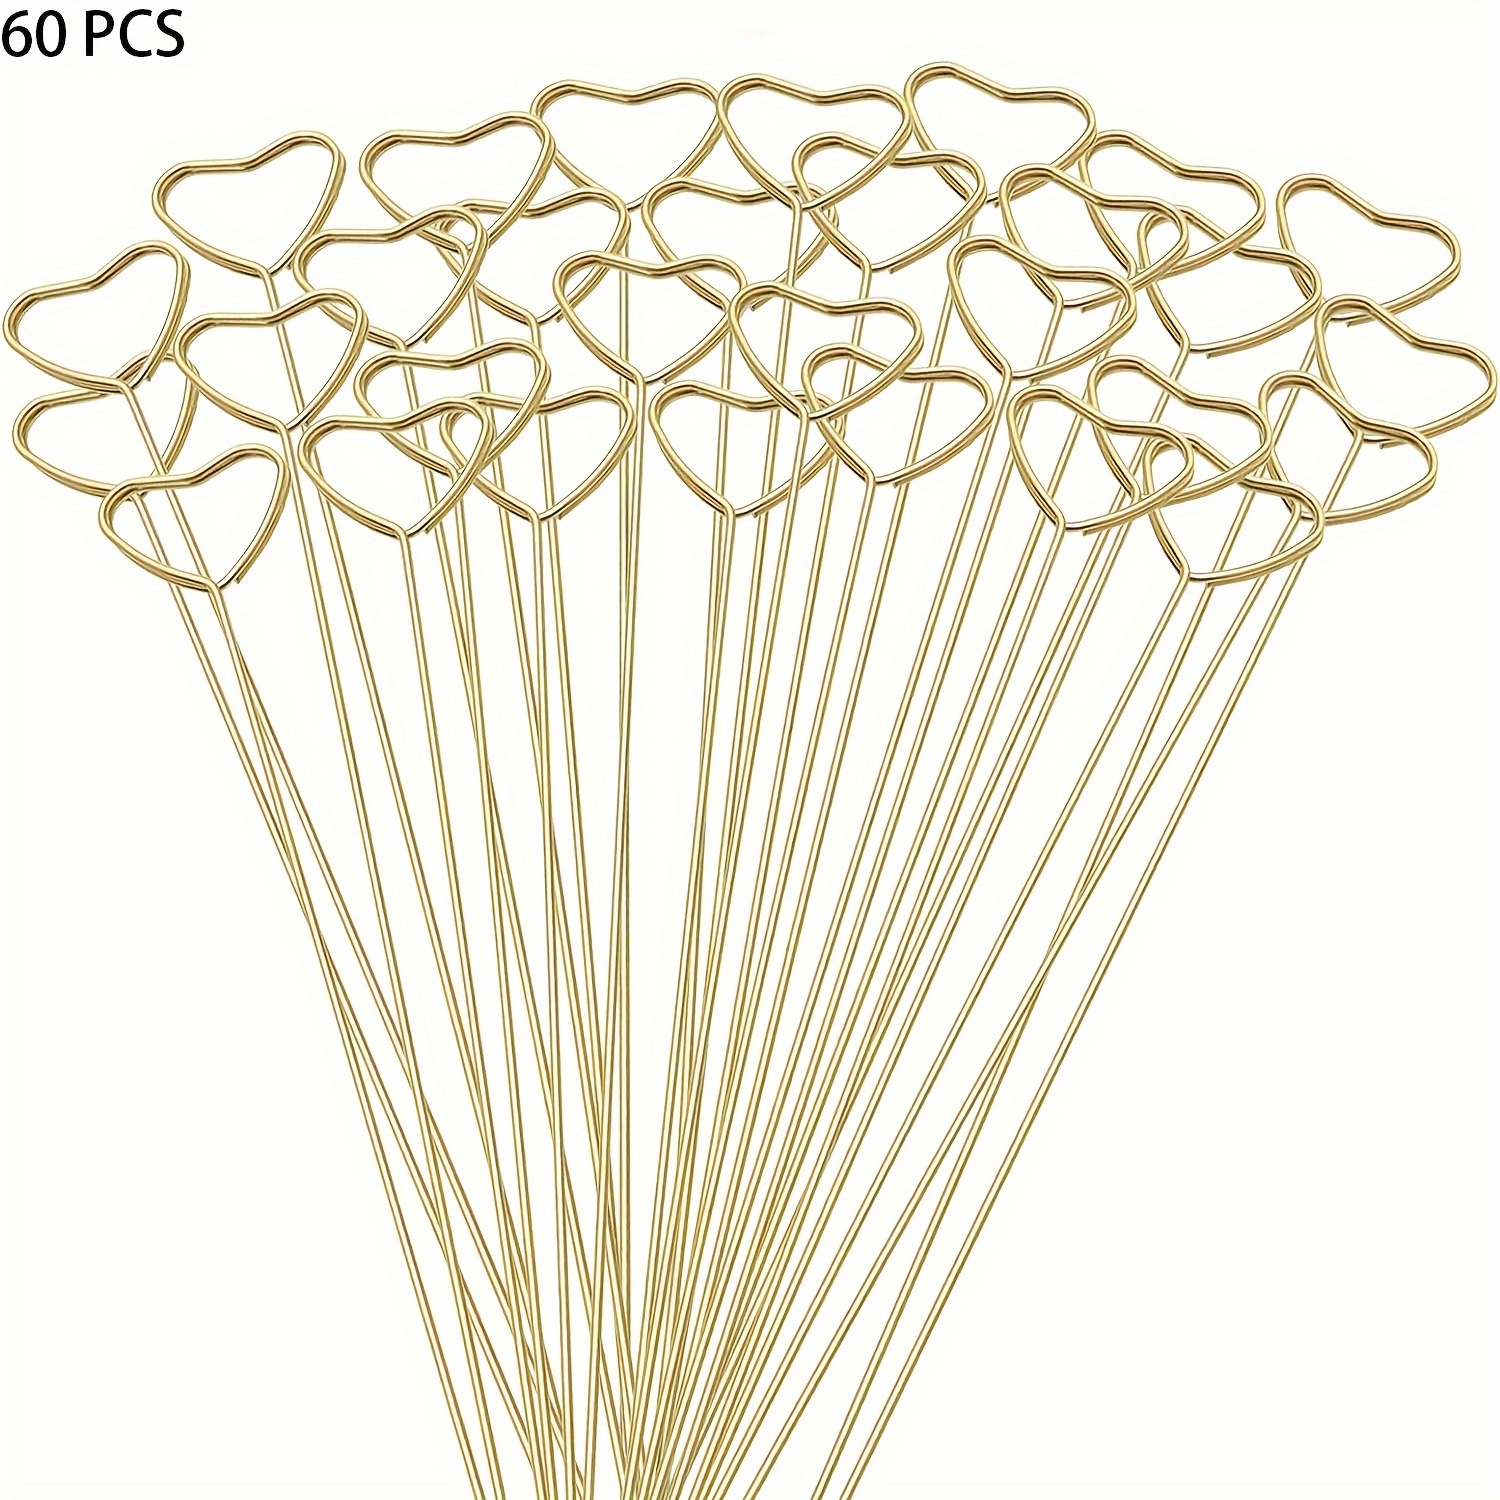 

60 Pcs Golden Wire Flower Place Card Holders - Perfect For Crafting And Gifting